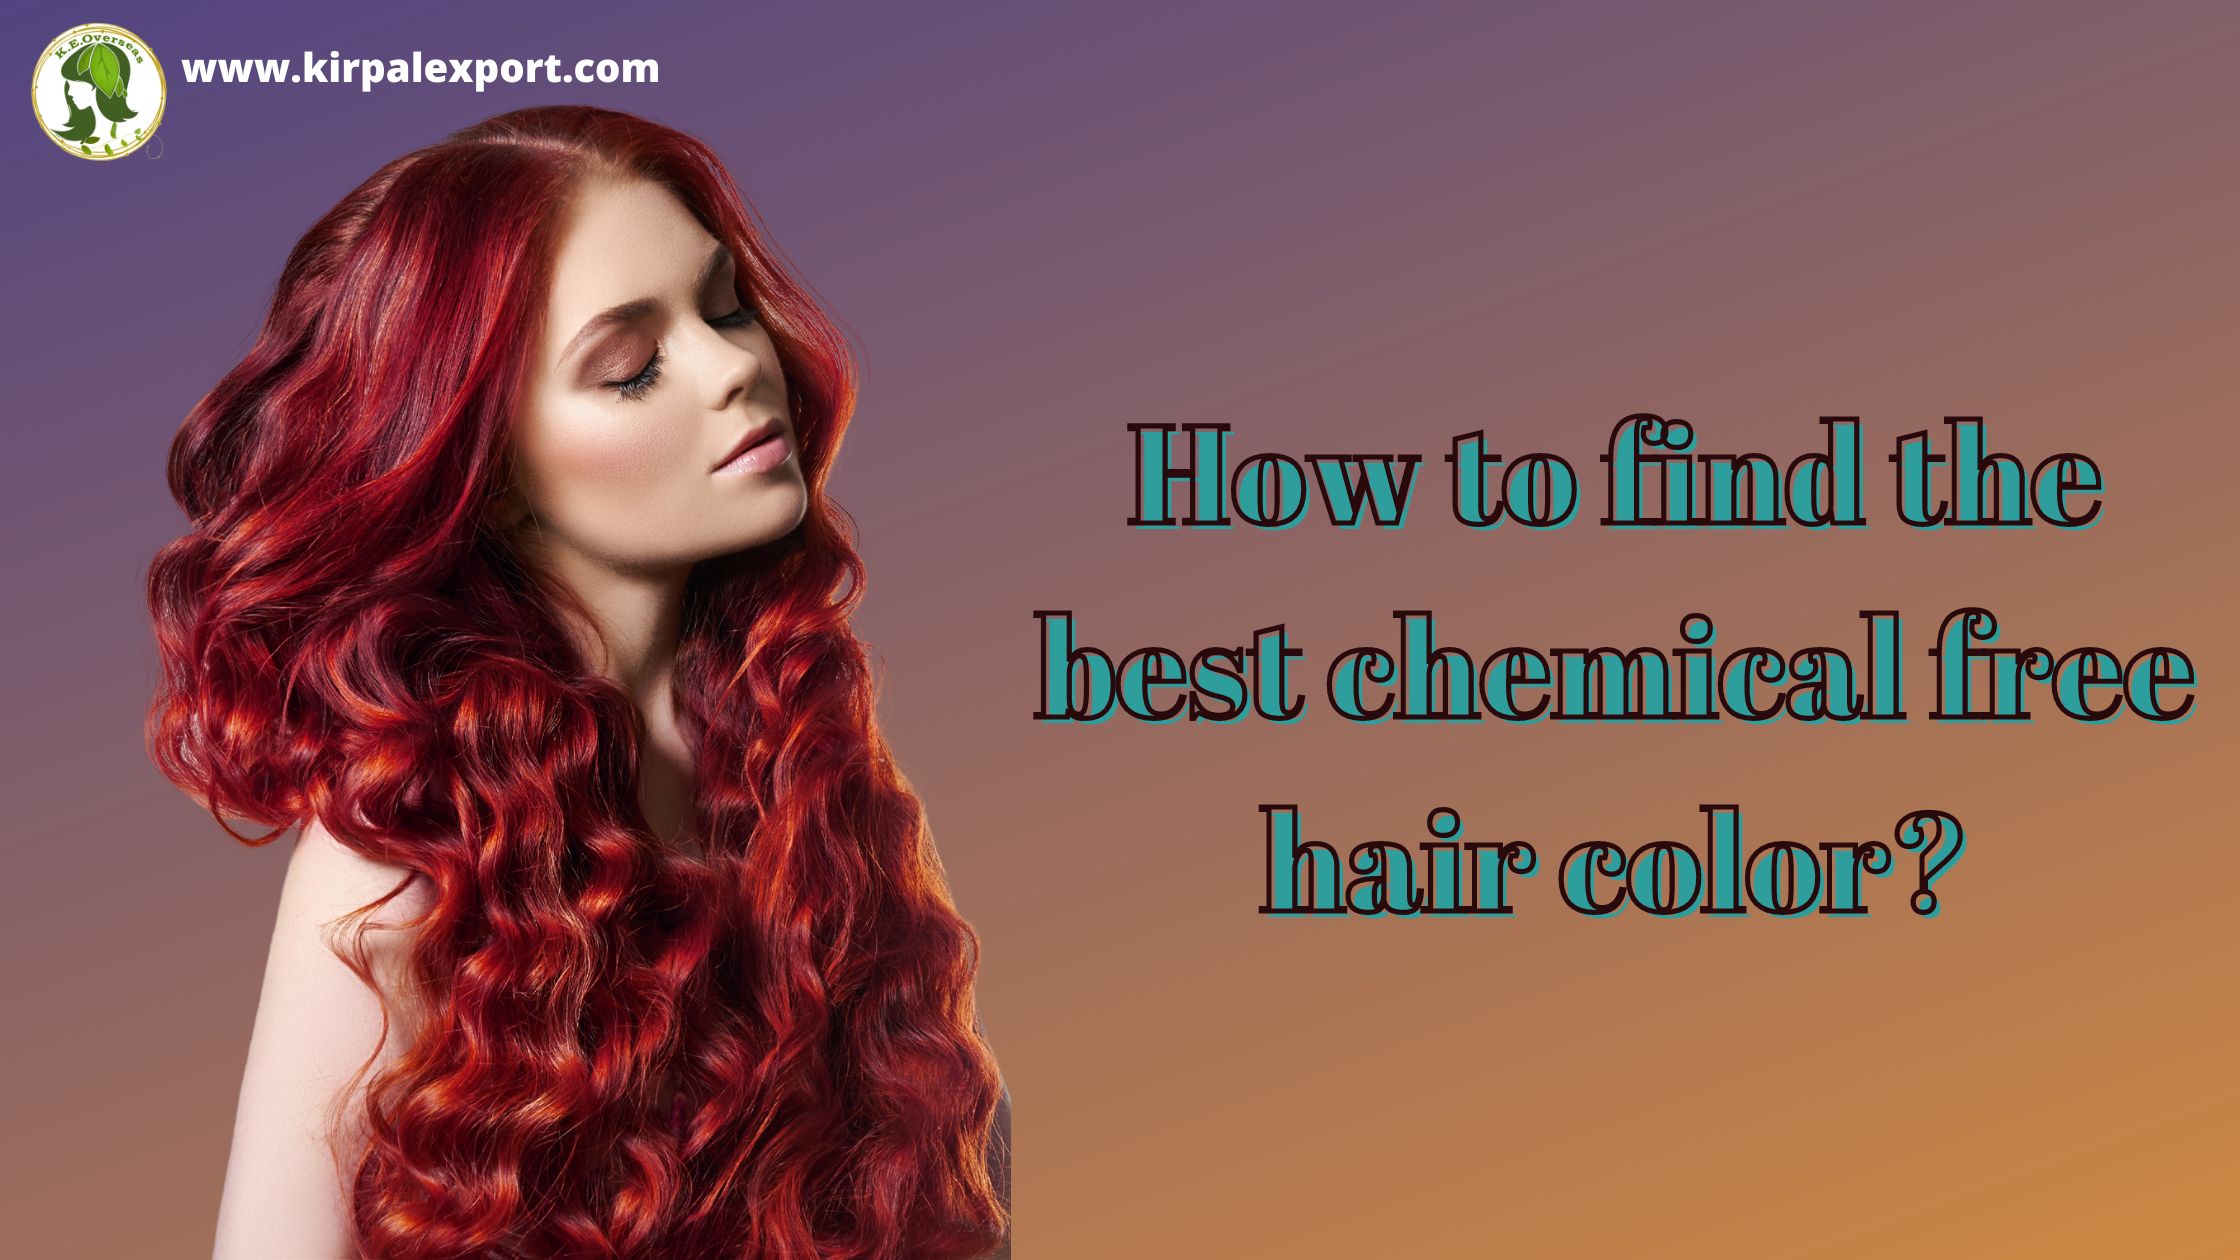 How to find the best chemical free hair color